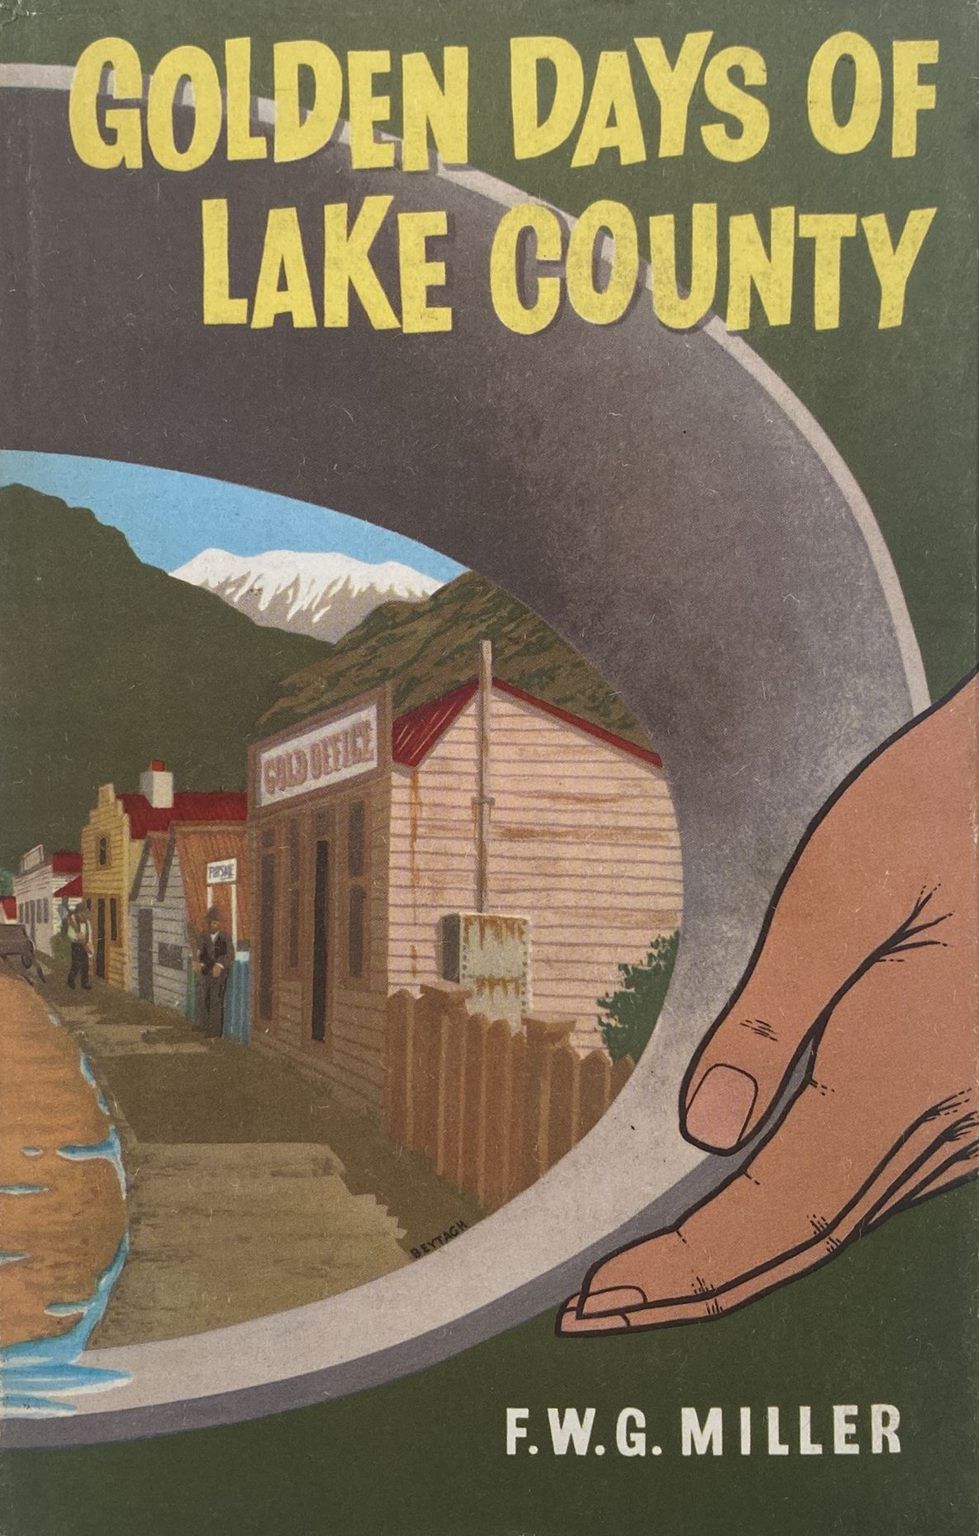 GOLDEN DAYS OF LAKE COUNTY